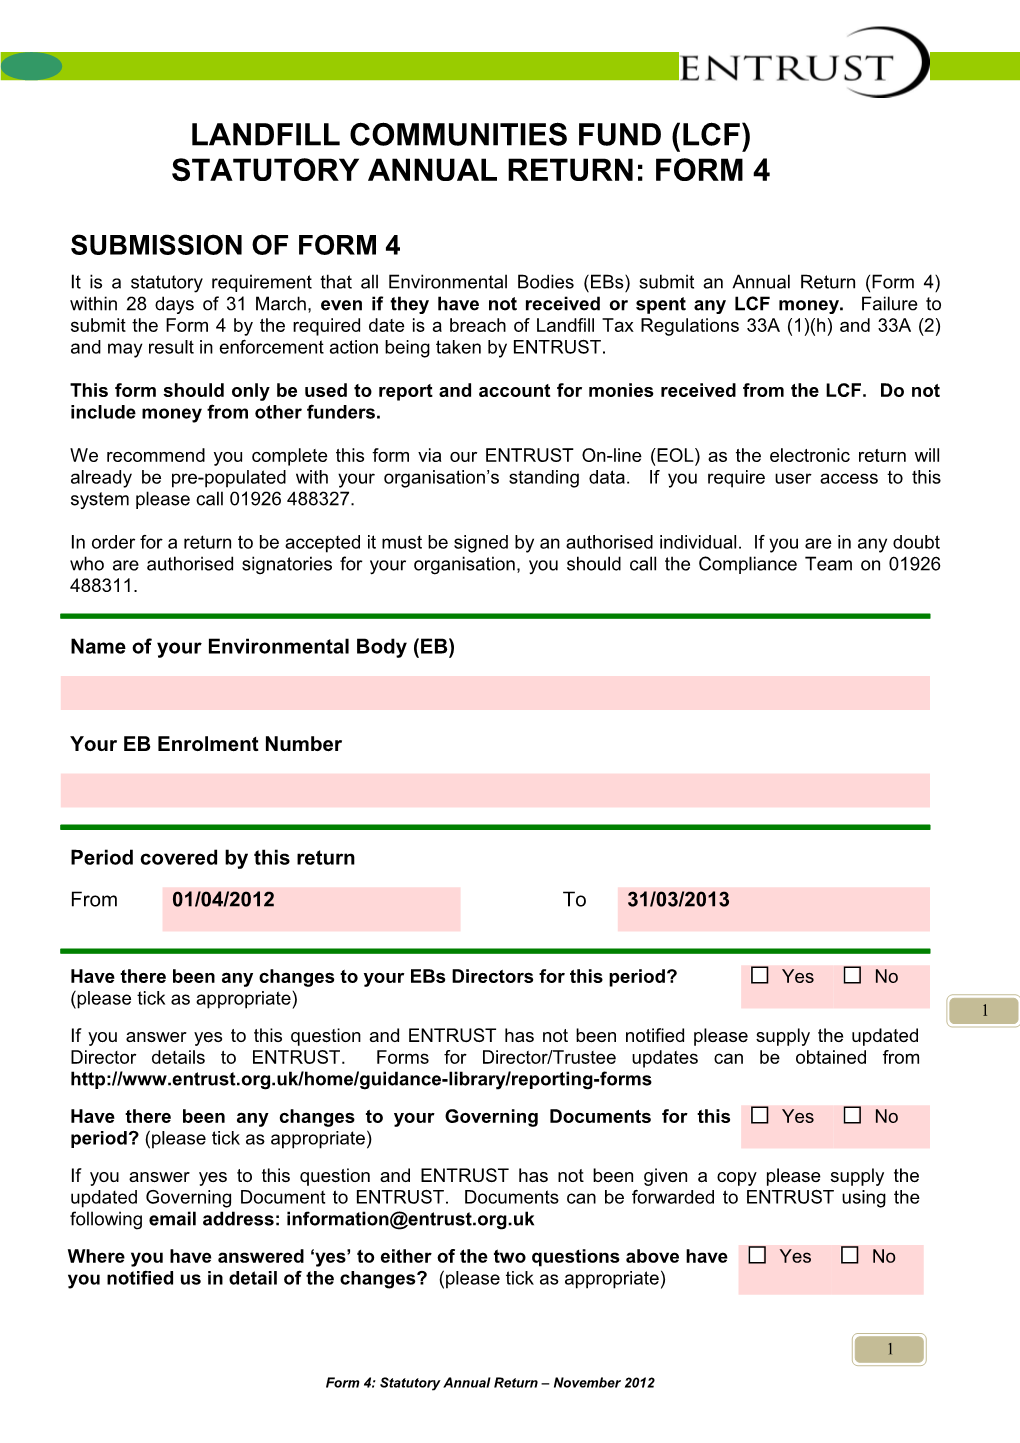 Do Not Use This Form for Repayment of Landfill Operator Contribution(S) - Contact ENTRUST